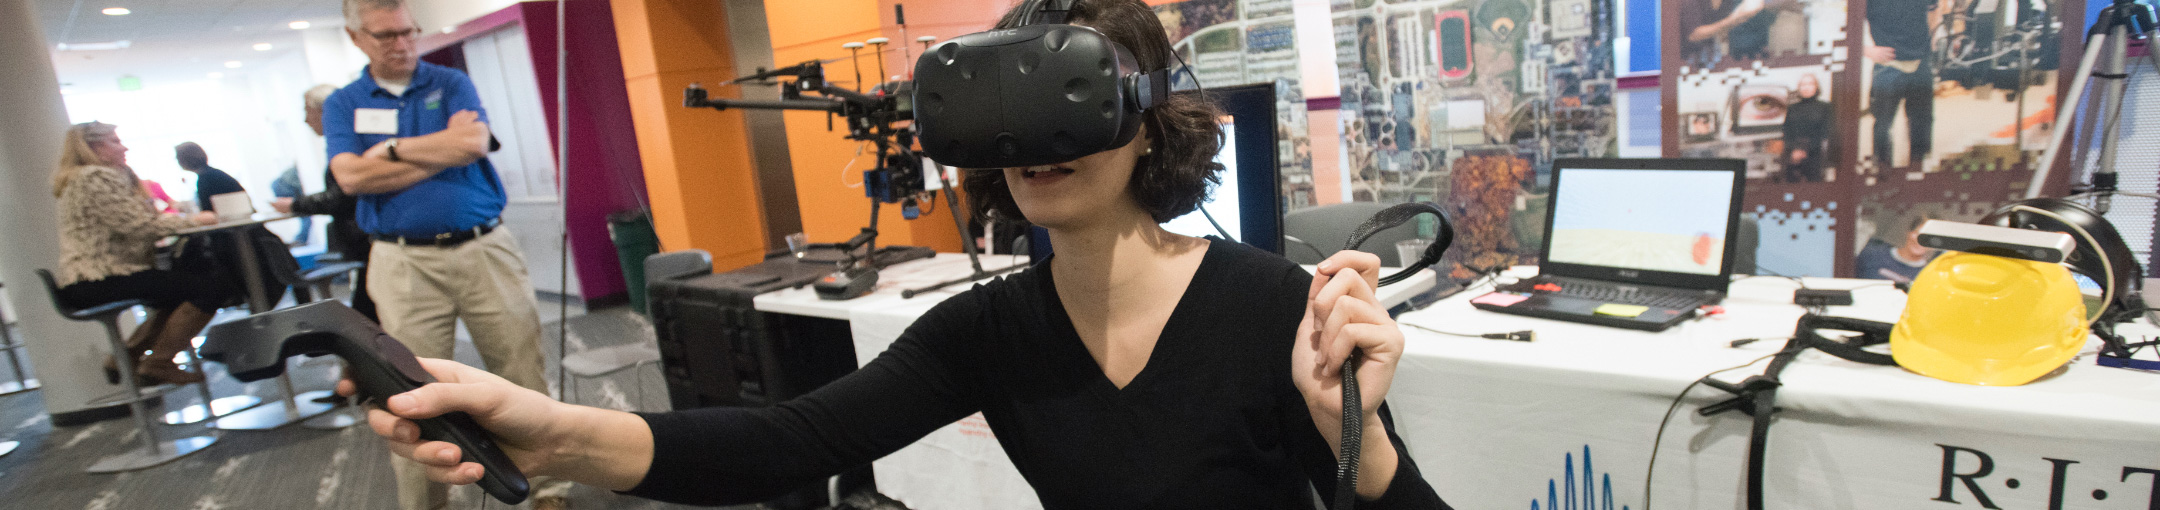 Woman using a VR headset.